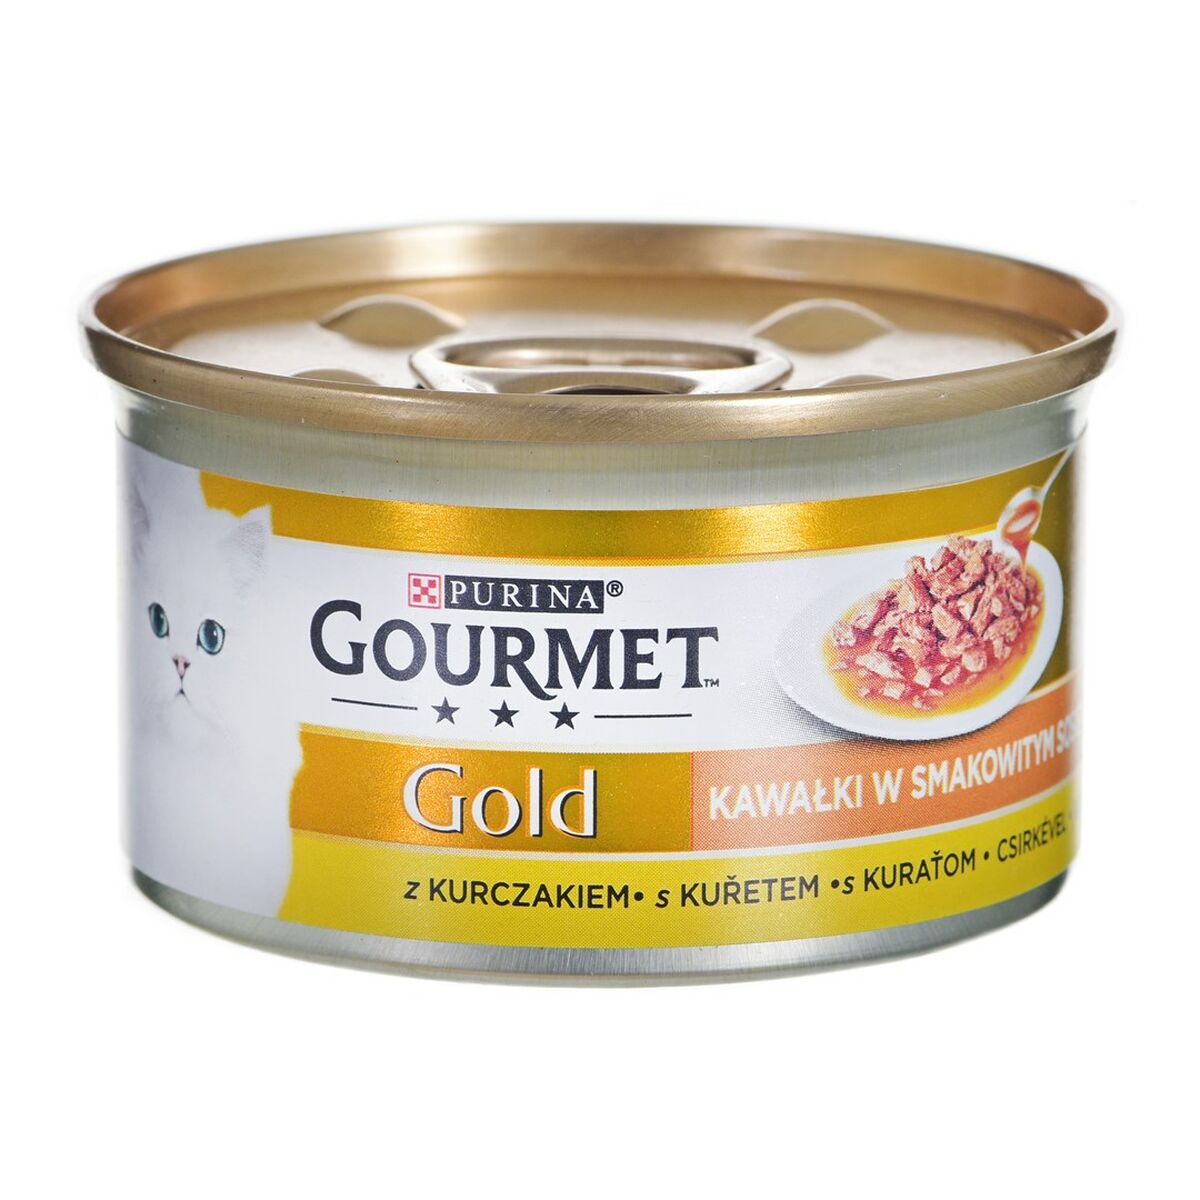 Aliments pour chat Purina Gourmet